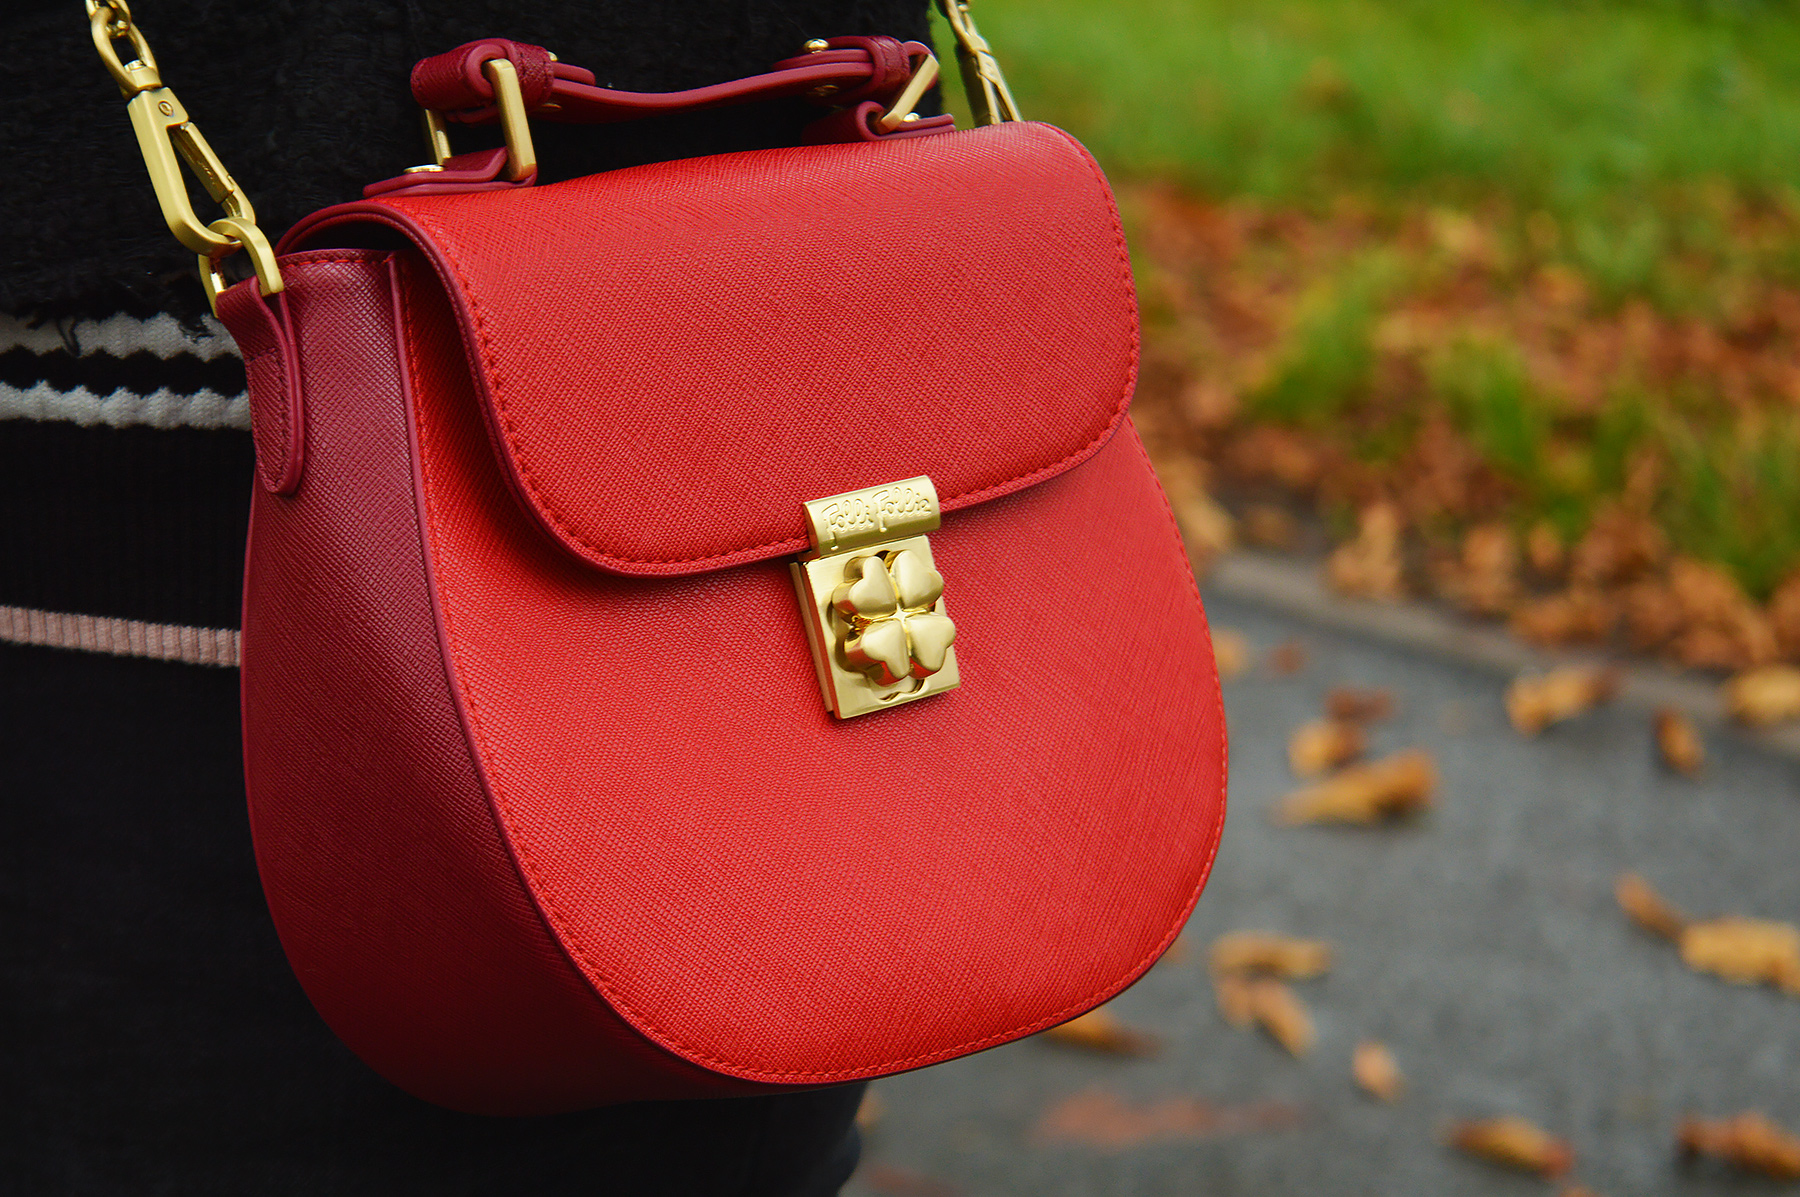 How to style red handbag blogger outfit